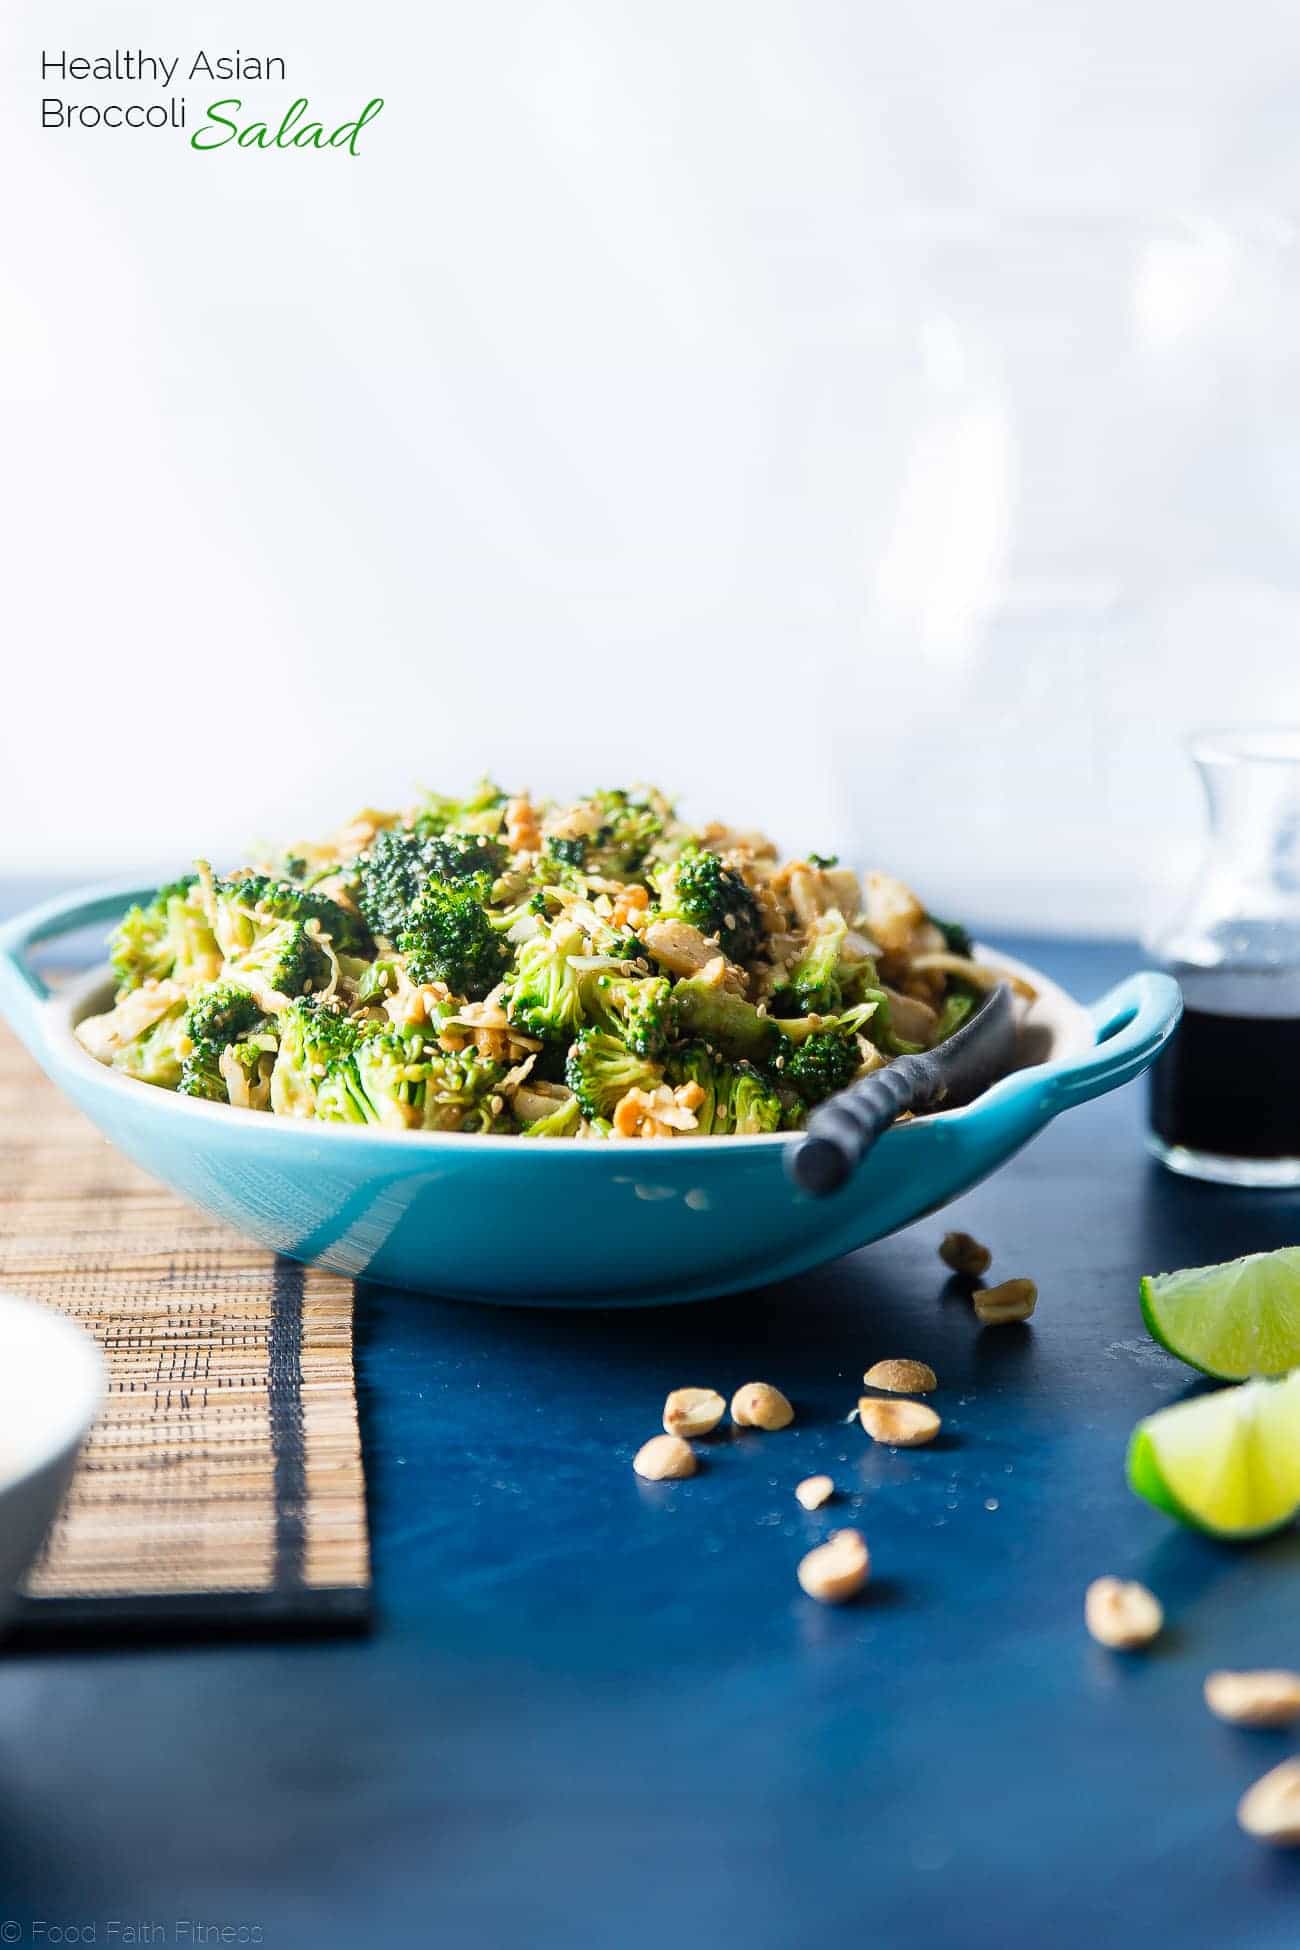  Asian Healthy Broccoli Salad - This crowd-pleasing healthy broccoli salad is a no-cook side dish, loaded with creamy peanut sauce! It's quick and easy, gluten free and vegan with a paleo option! | Foodfaithfitness.com | @FoodFaithFit